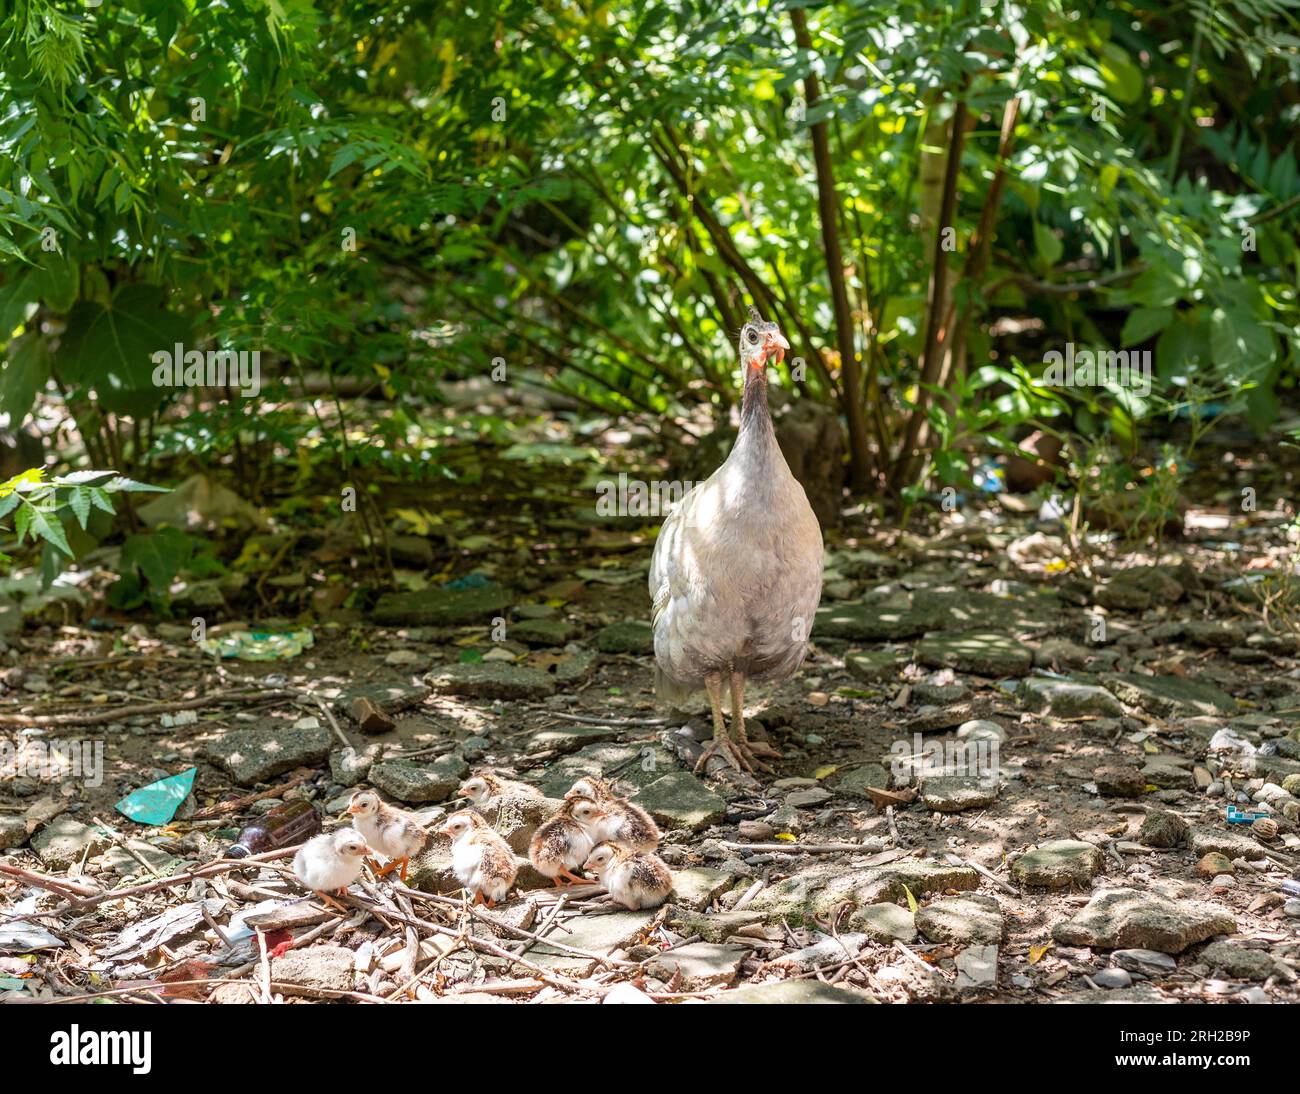 Guineafowl broody hen with her new hatch out chicks in the garden Stock Photo